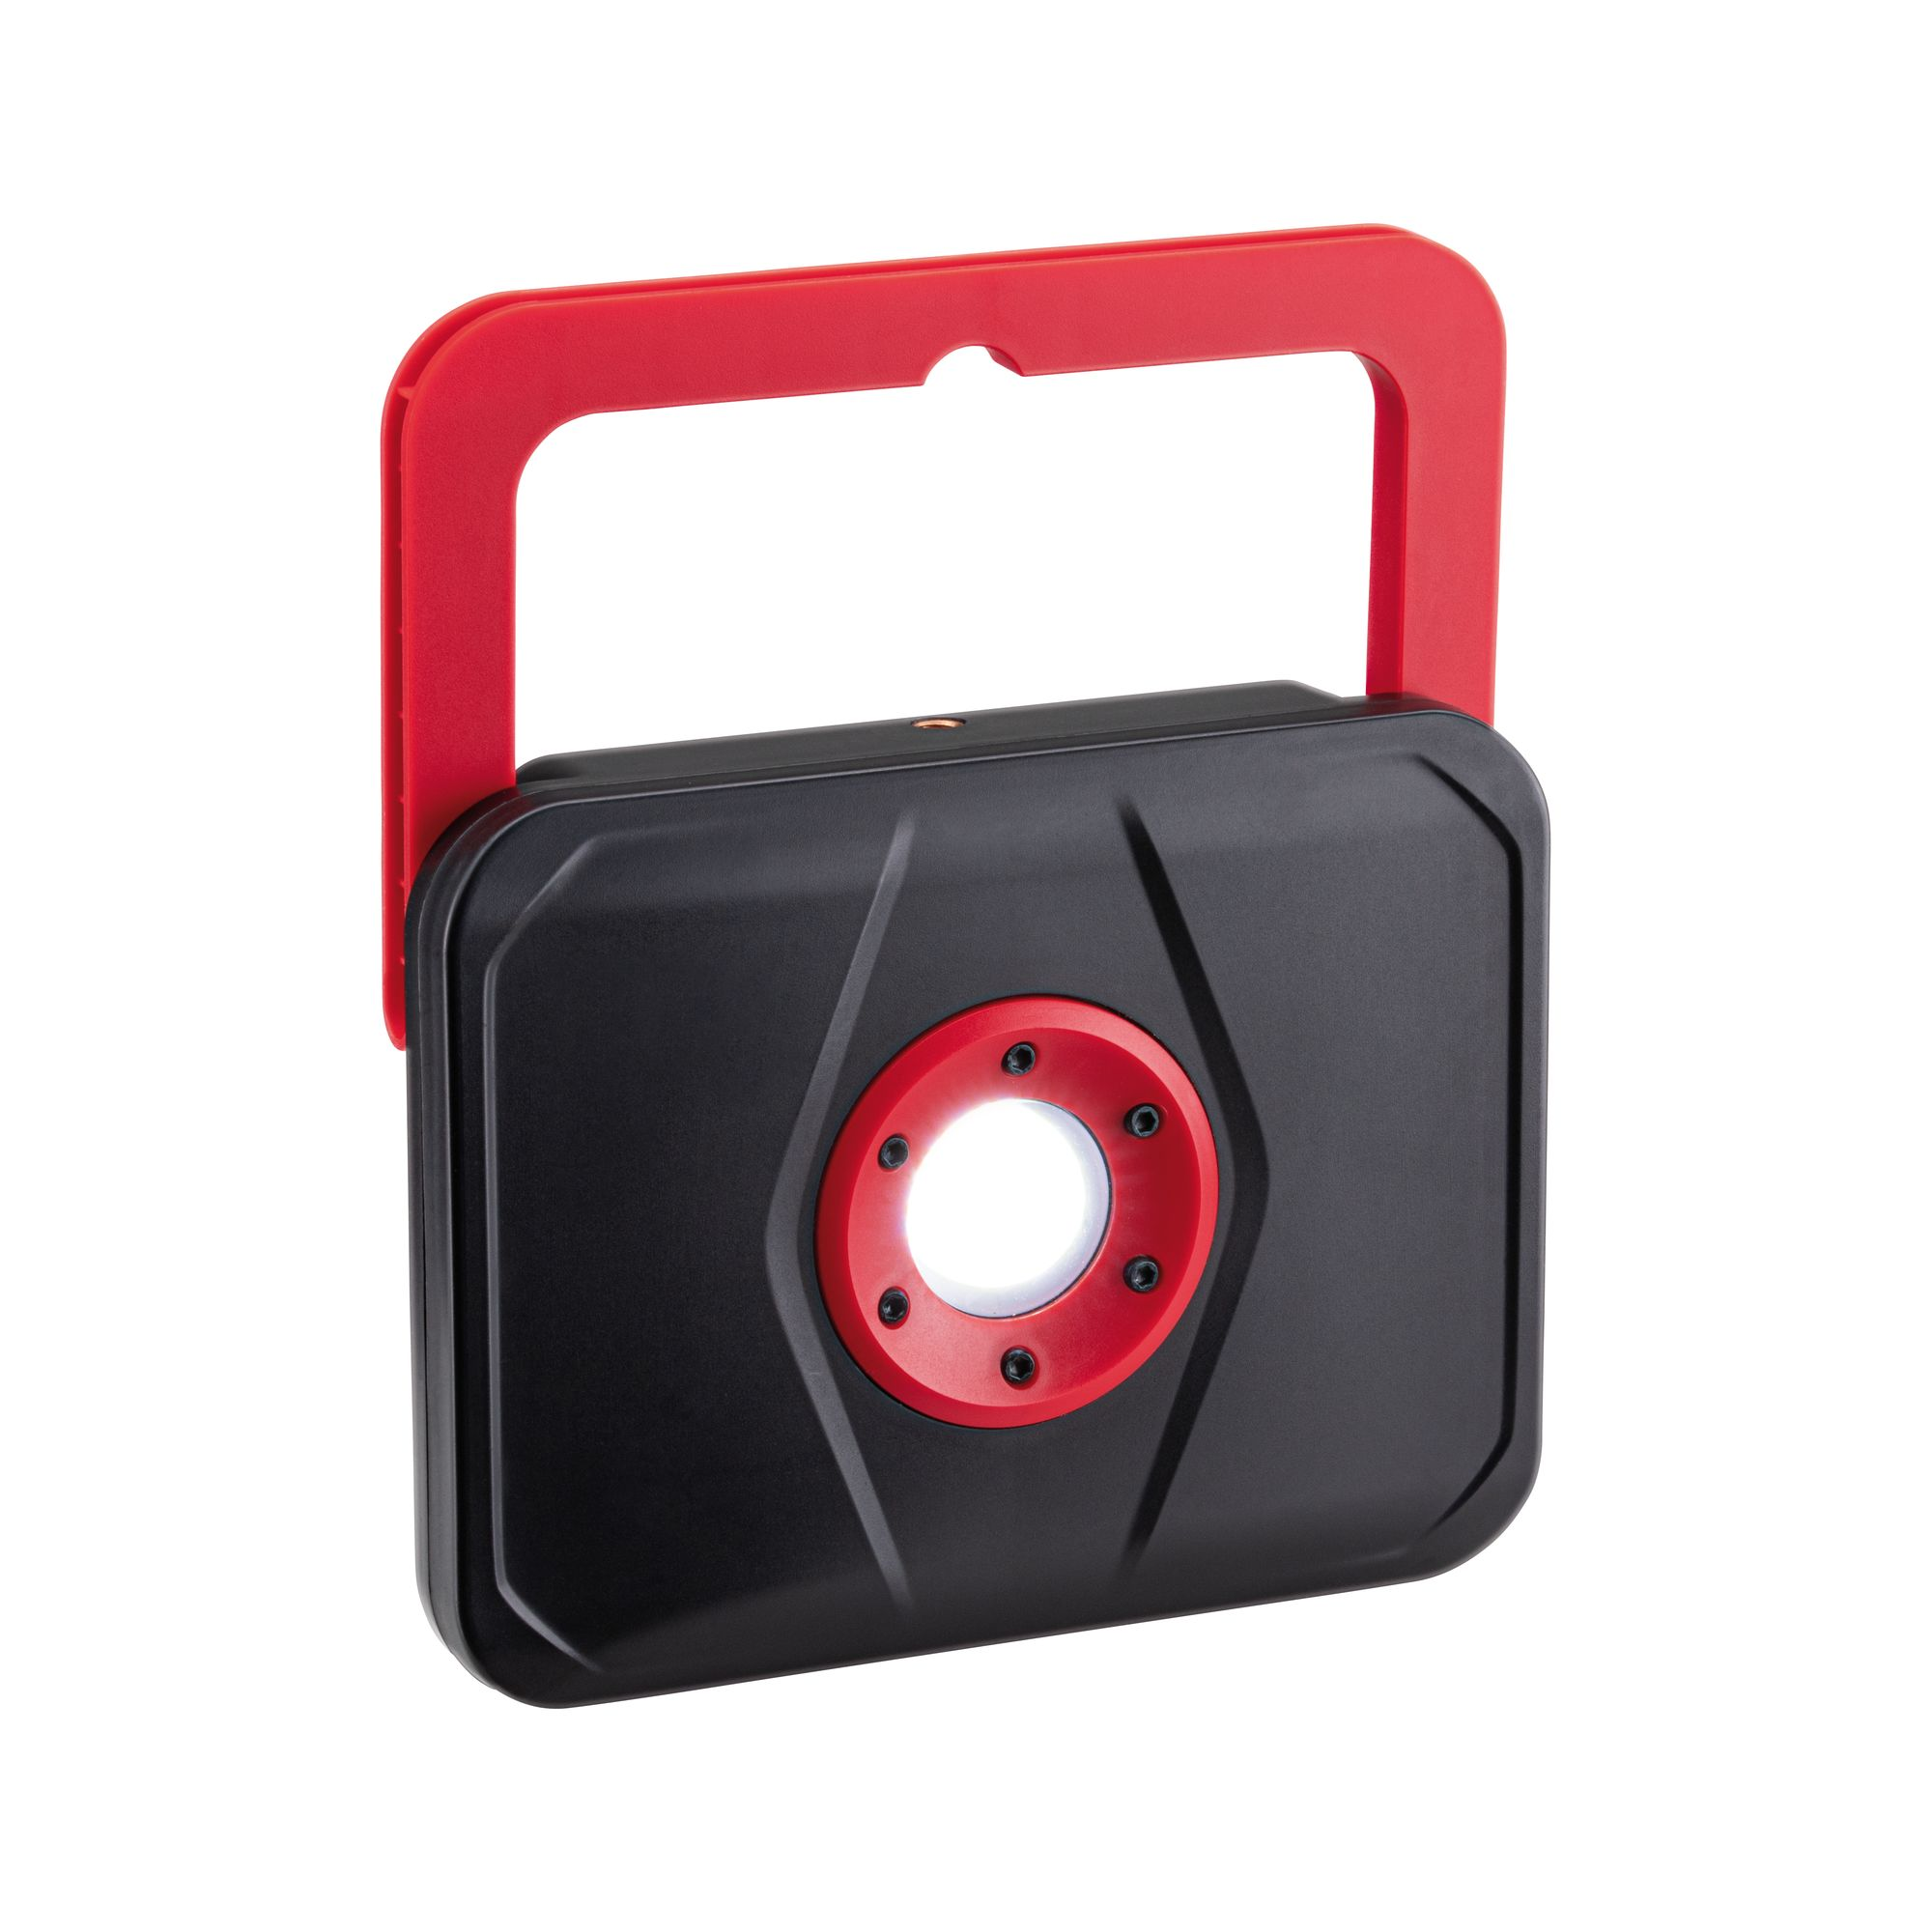 Akku-Baustrahler 'Mobile Worklight' rot/schwarz 5 W 440 lm + product picture